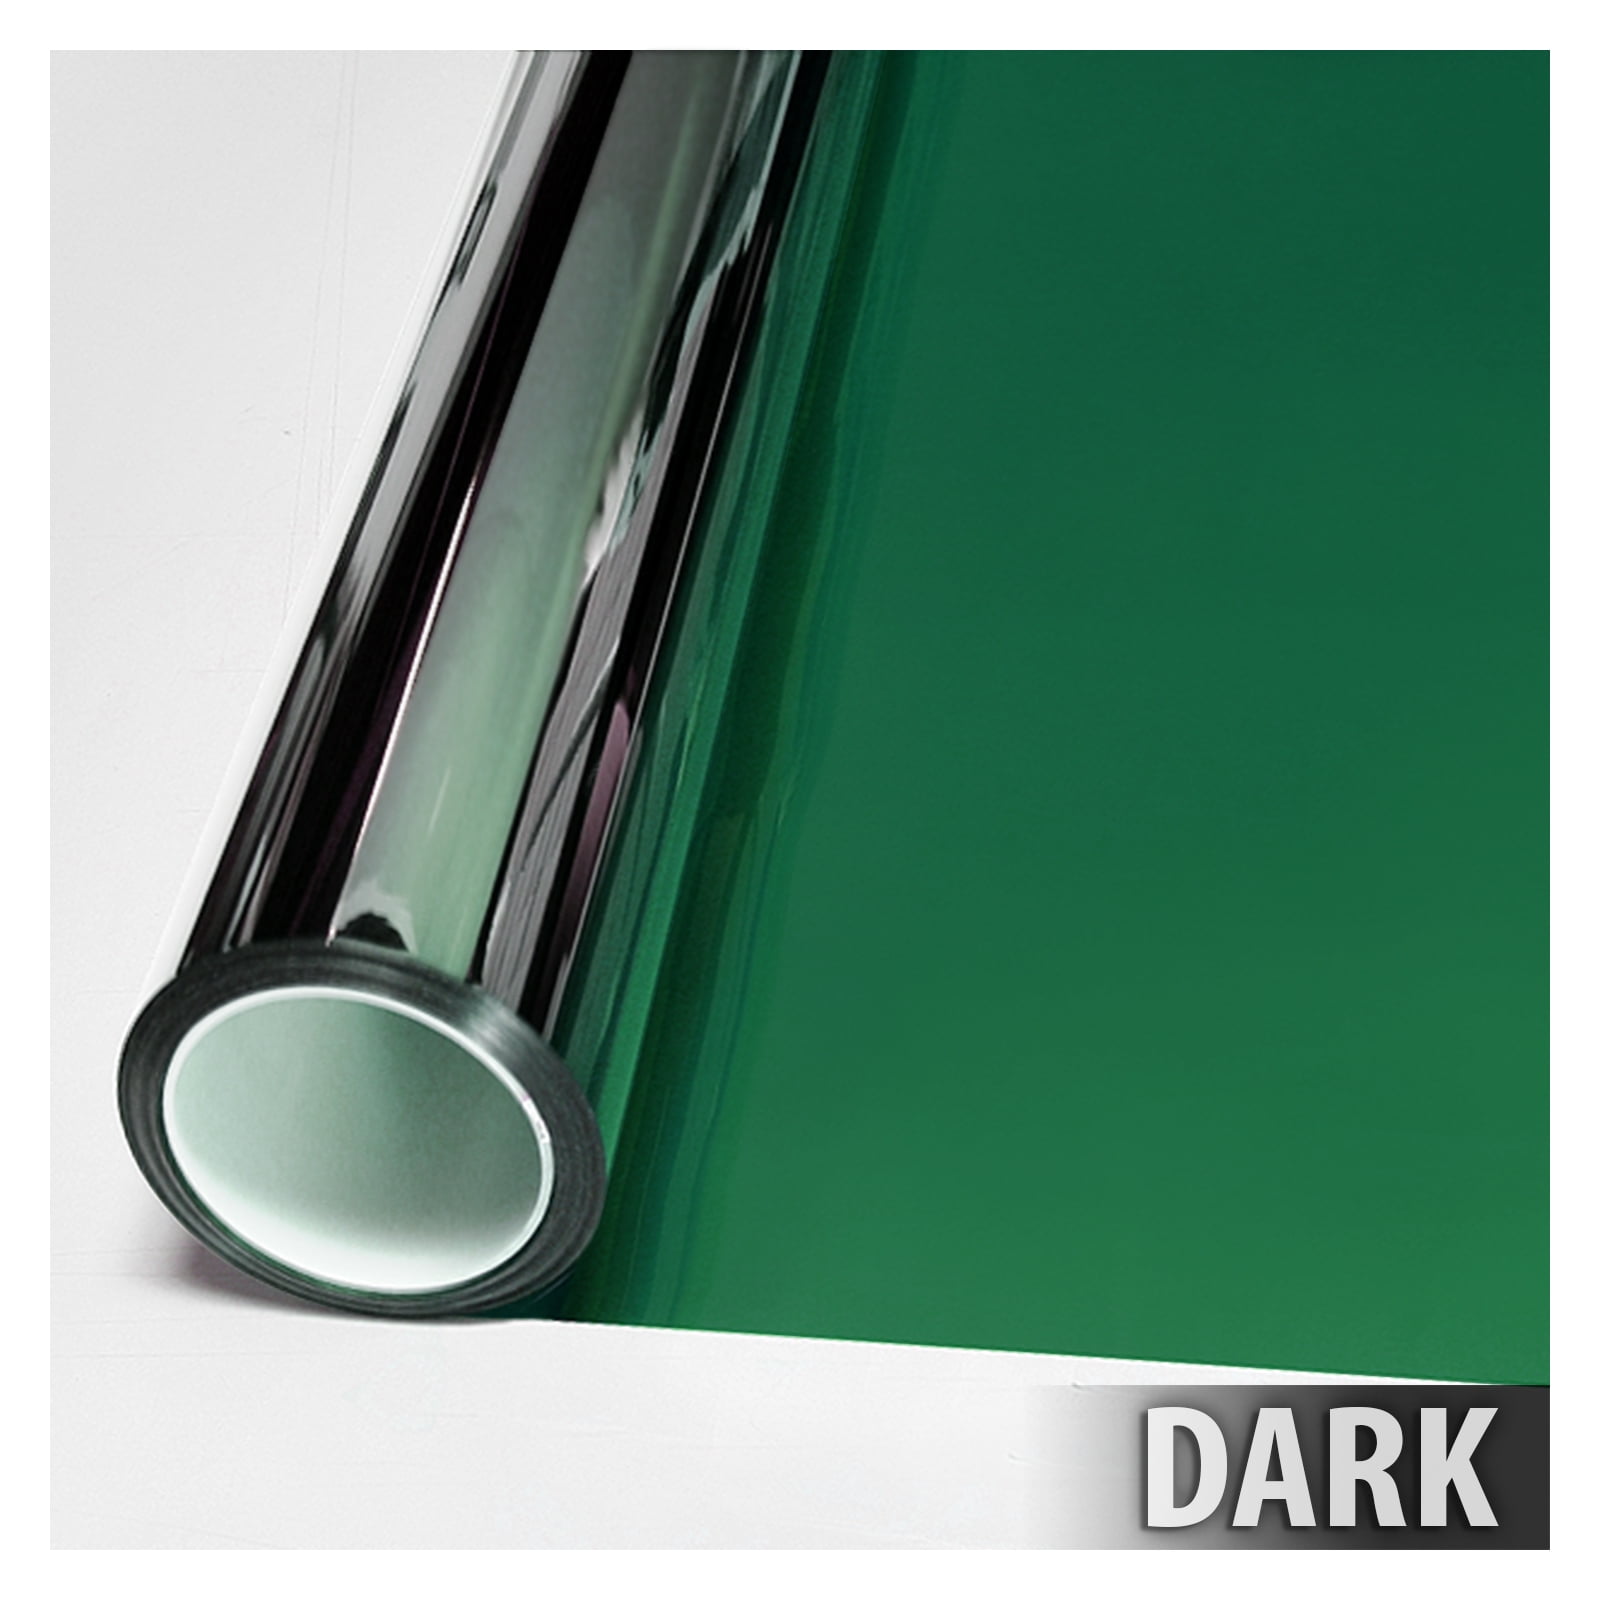 BDF PRGN Window Film Premium Color High Heat Control and Daytime Privacy Green 